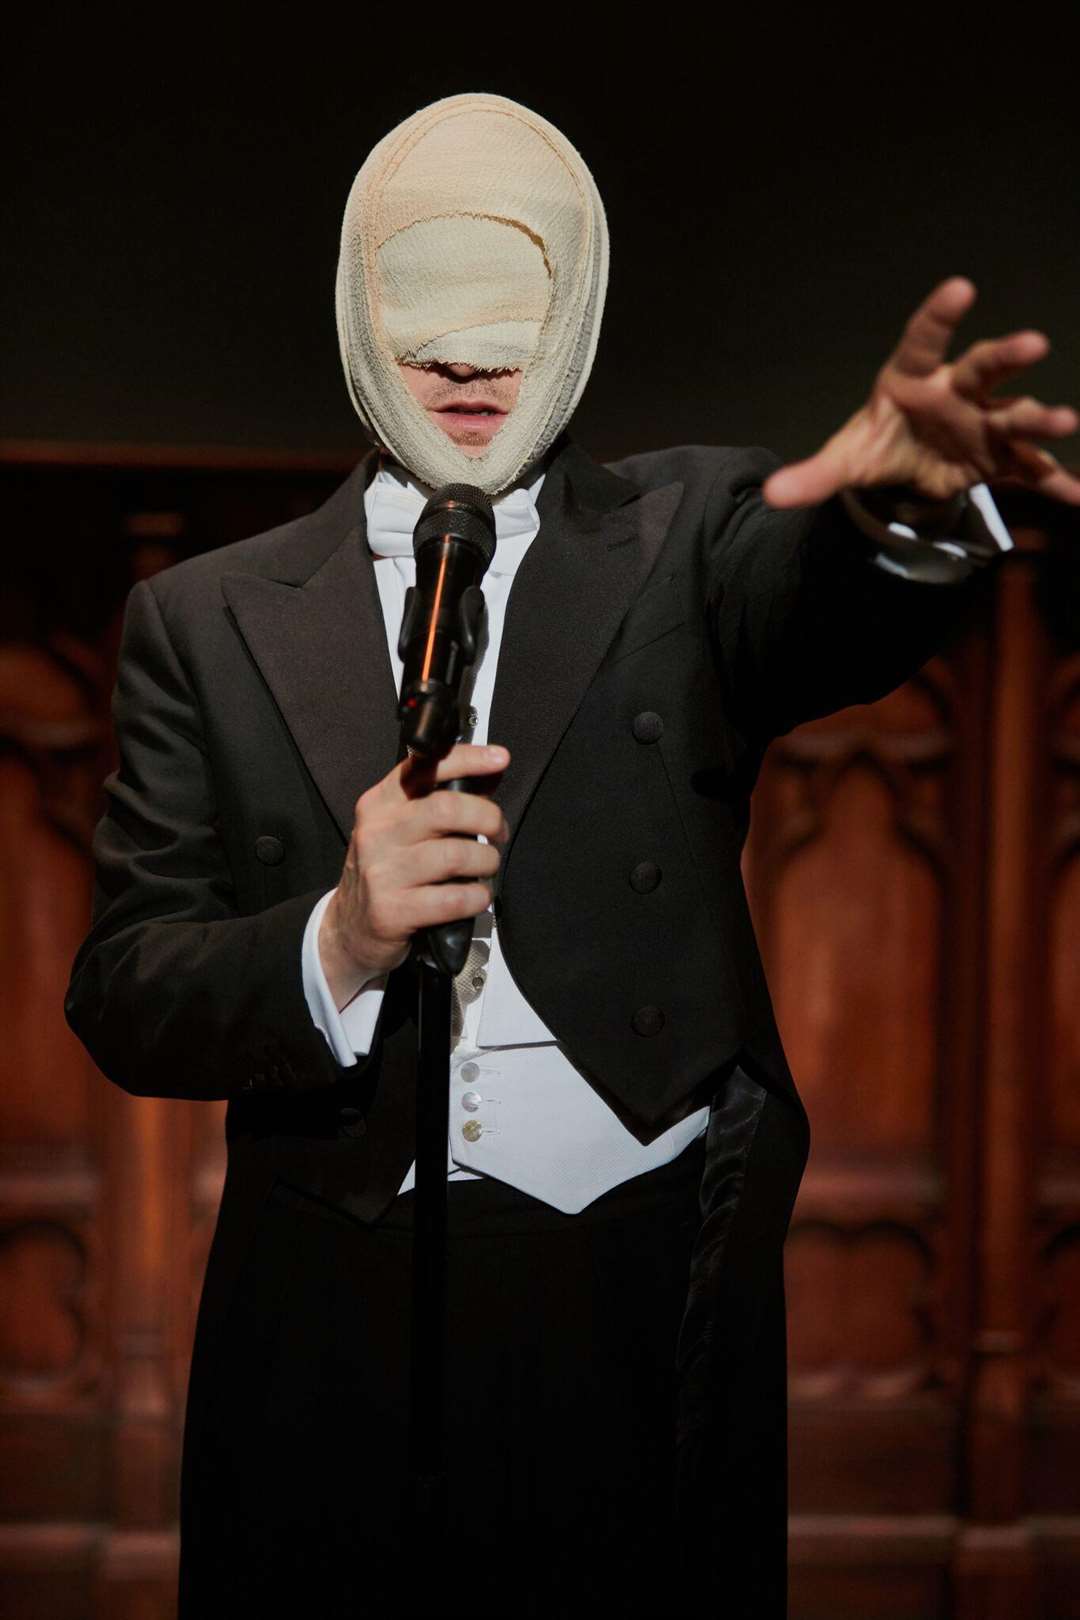 Derren Brown concealed his face to perform a stunt during the show (2782628)